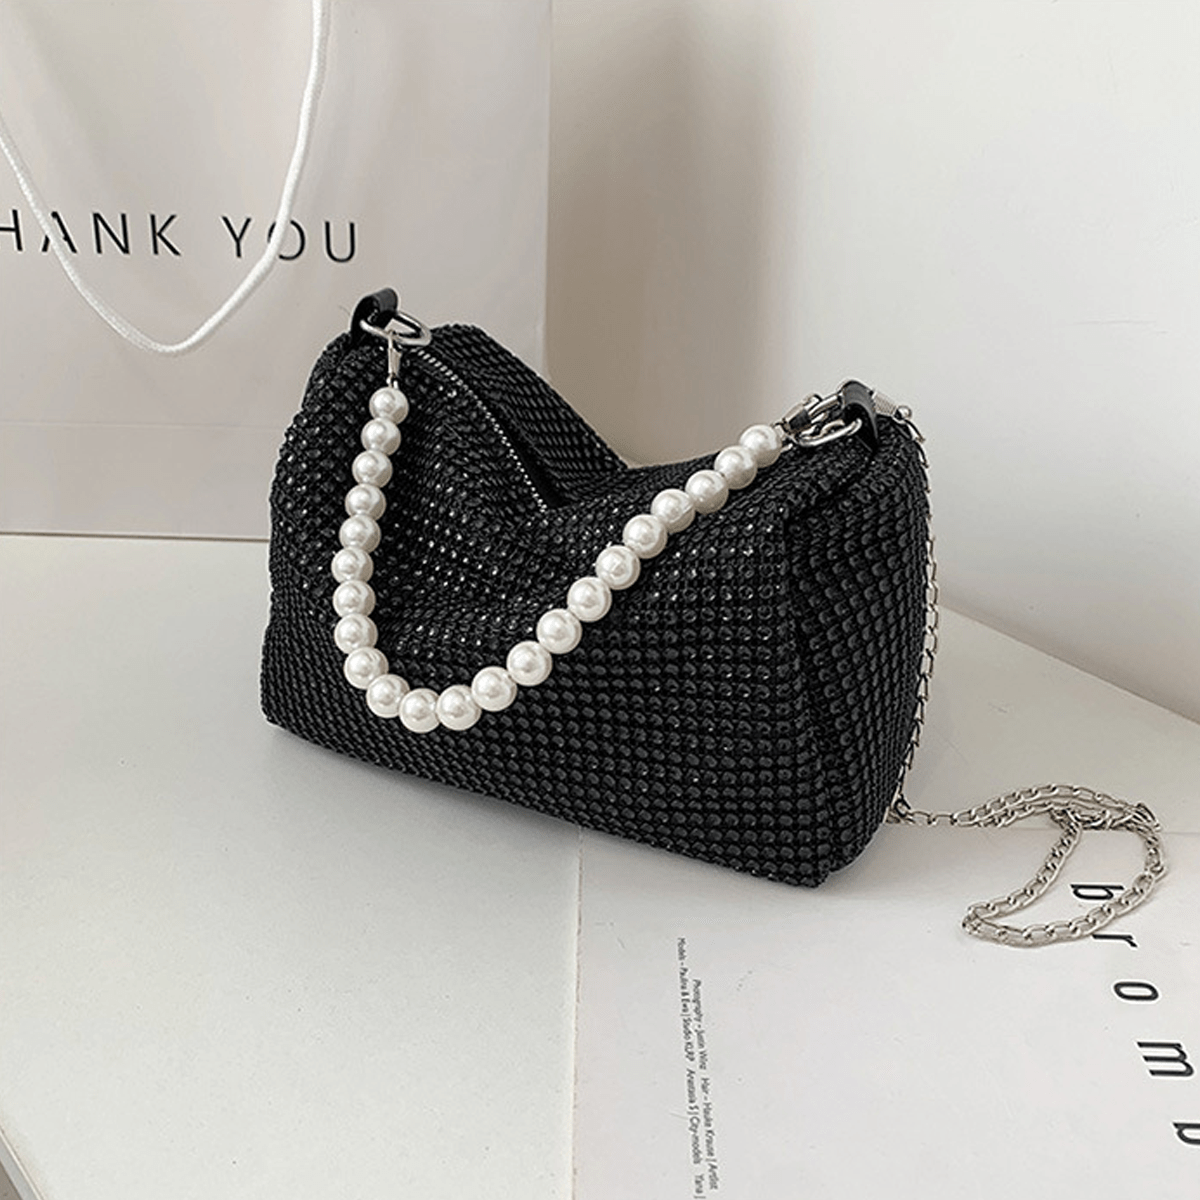 realaiot  Bling-Bling Rhinestone Shoulder Bag, Trendy Chain Clutch Purse, Shiny Chain Crossbody Bag For Evening Party Prom Wedding